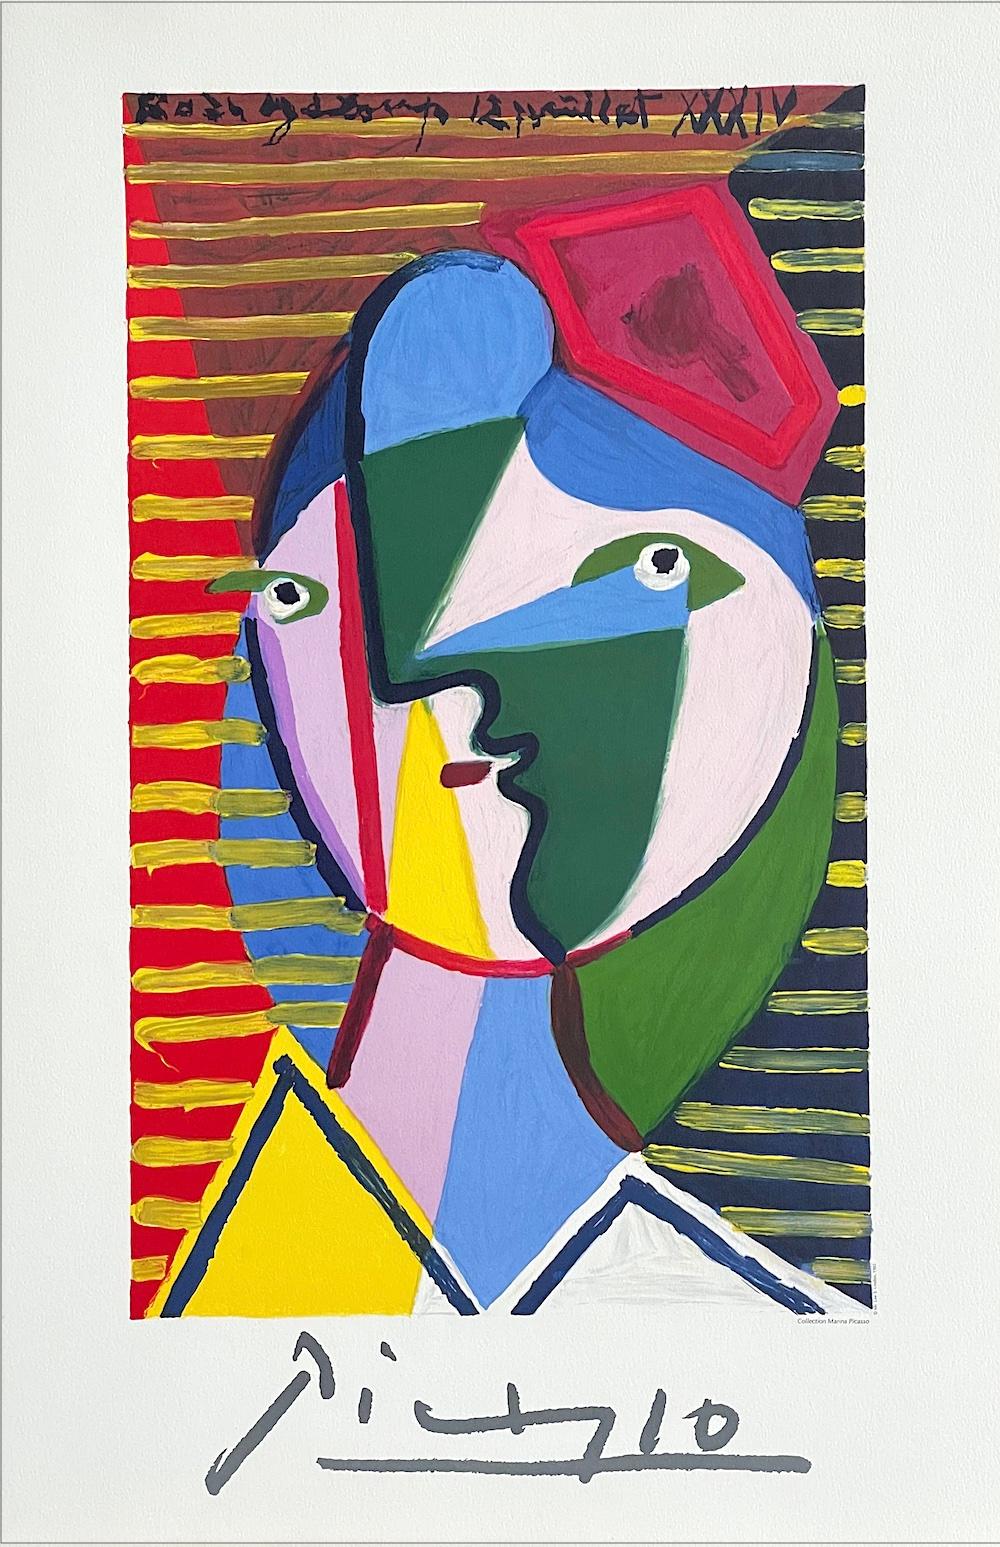 (after) Pablo Picasso Abstract Print - VISAGE DE FEMME SUR FOND RAYE Lithograph, Abstract Portrait, Round Face, Stripes